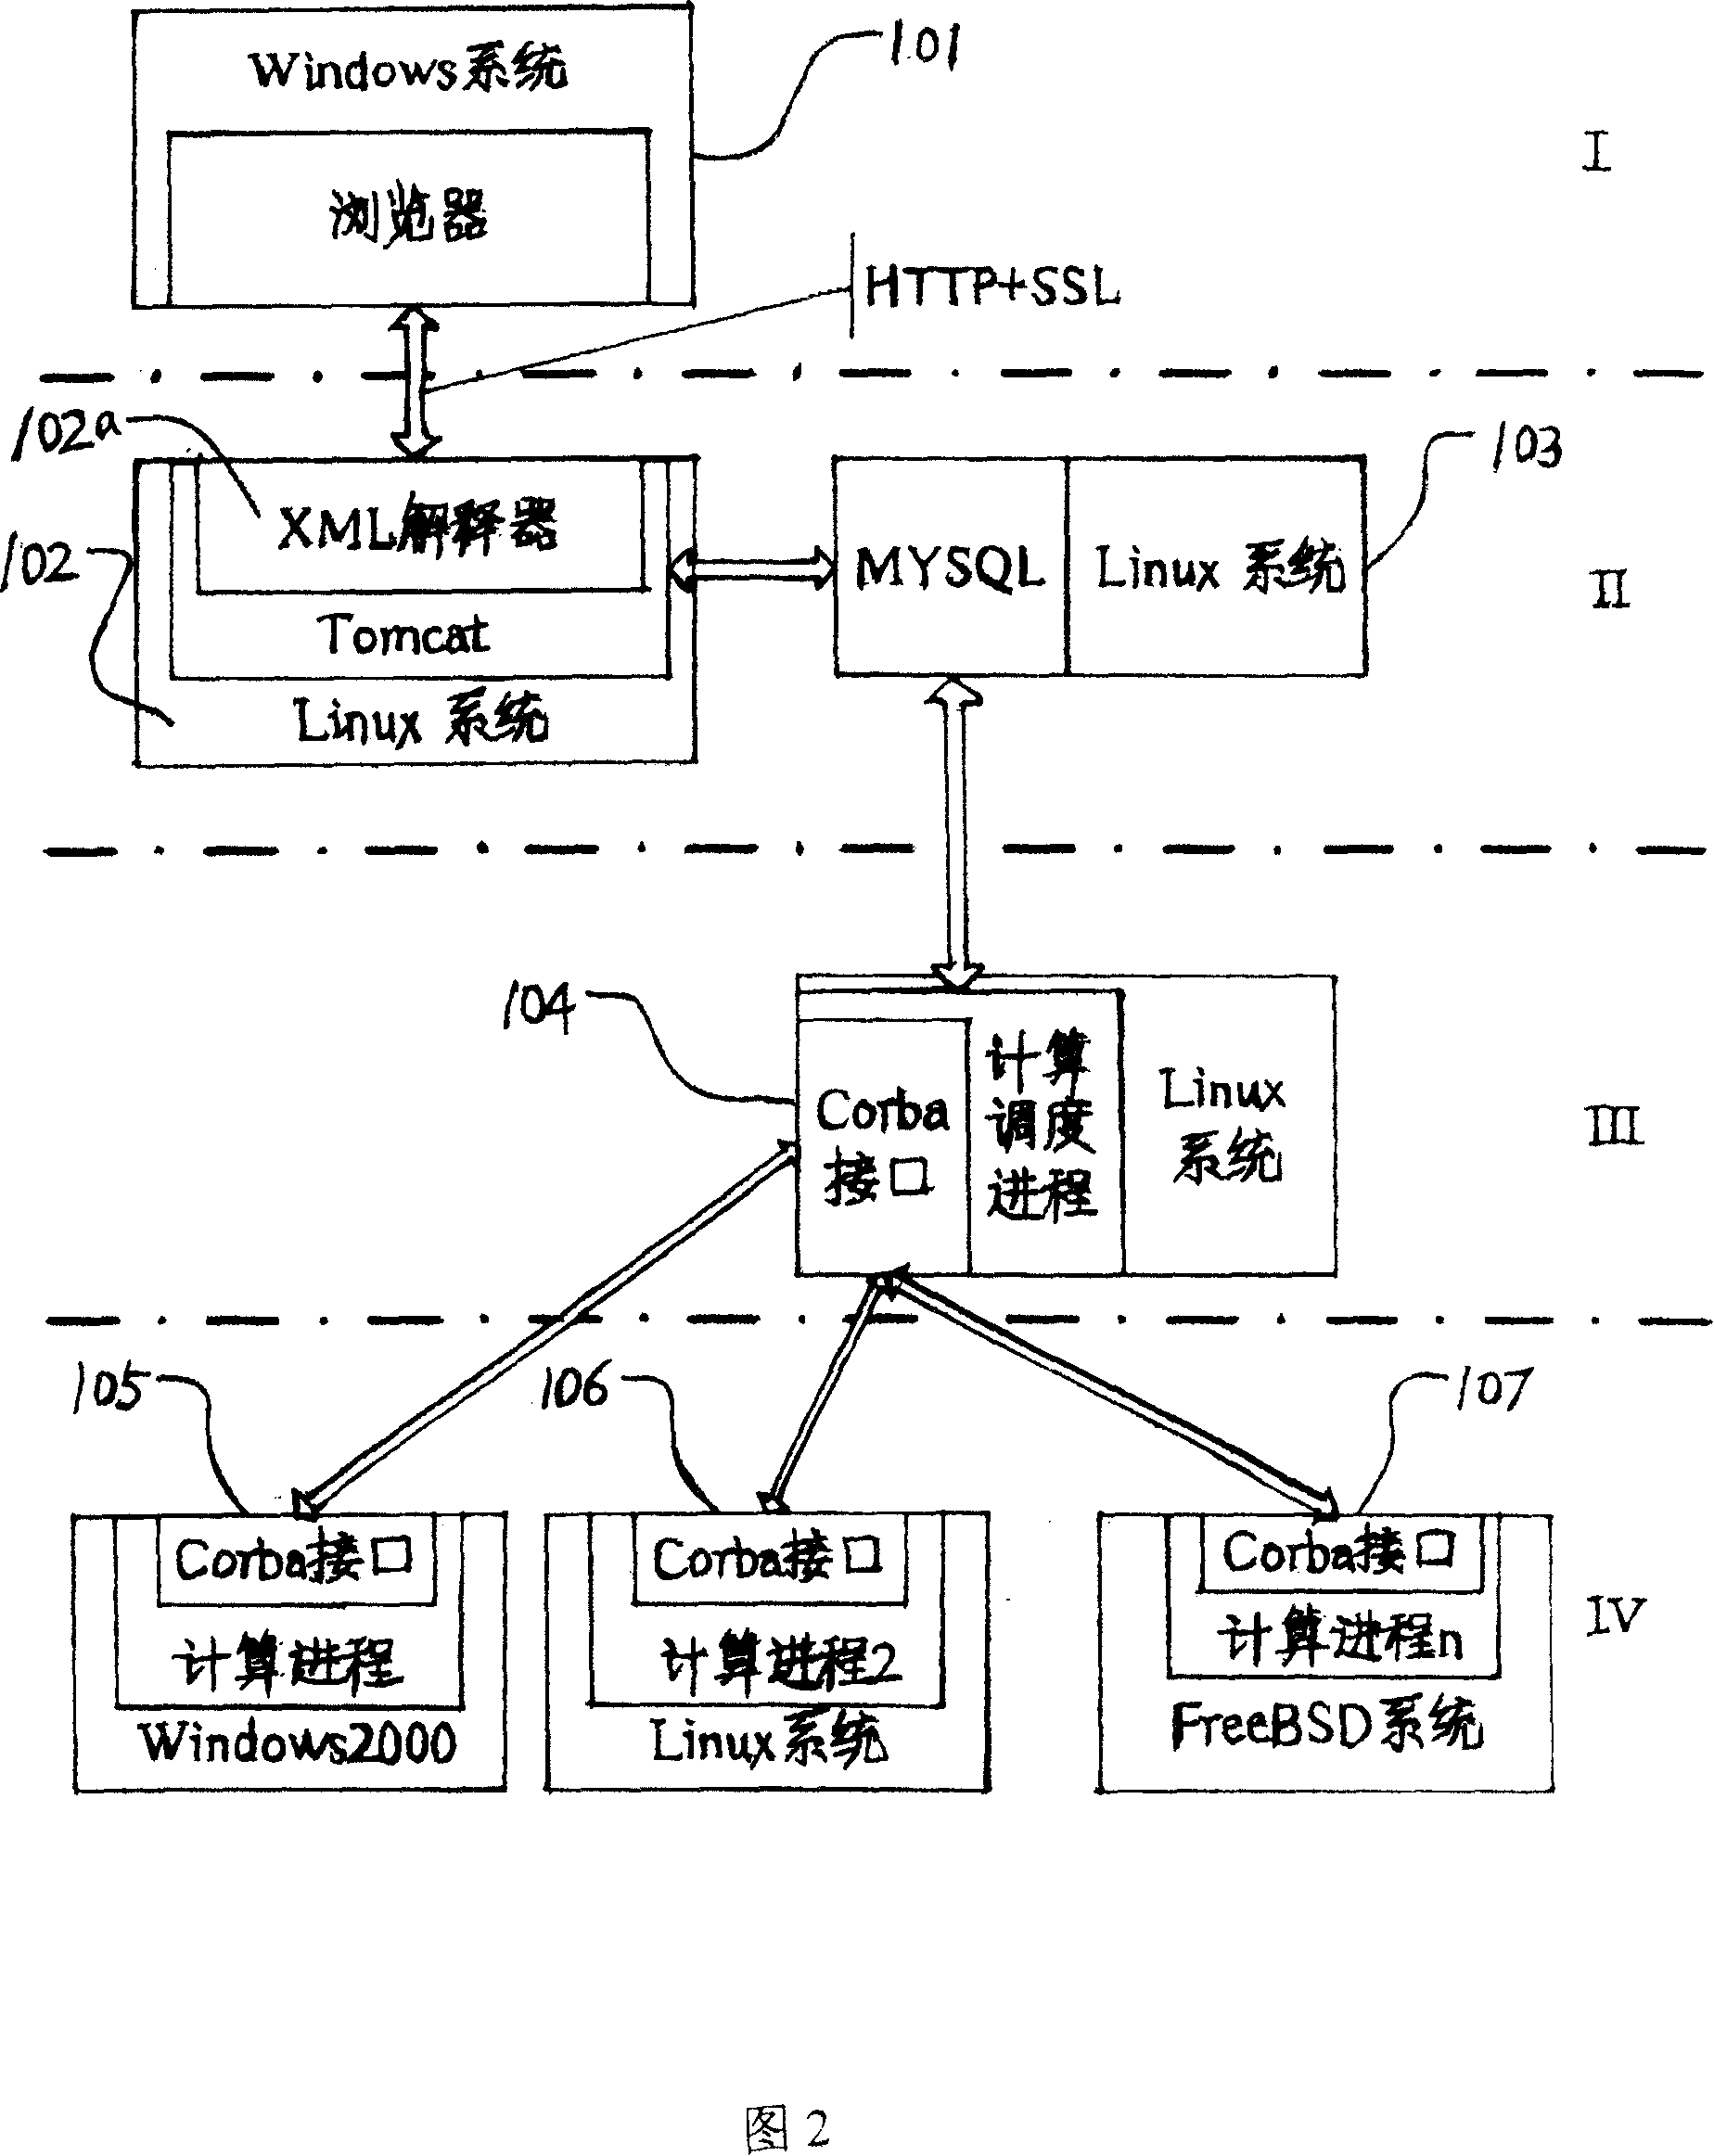 Structure of network simulation service